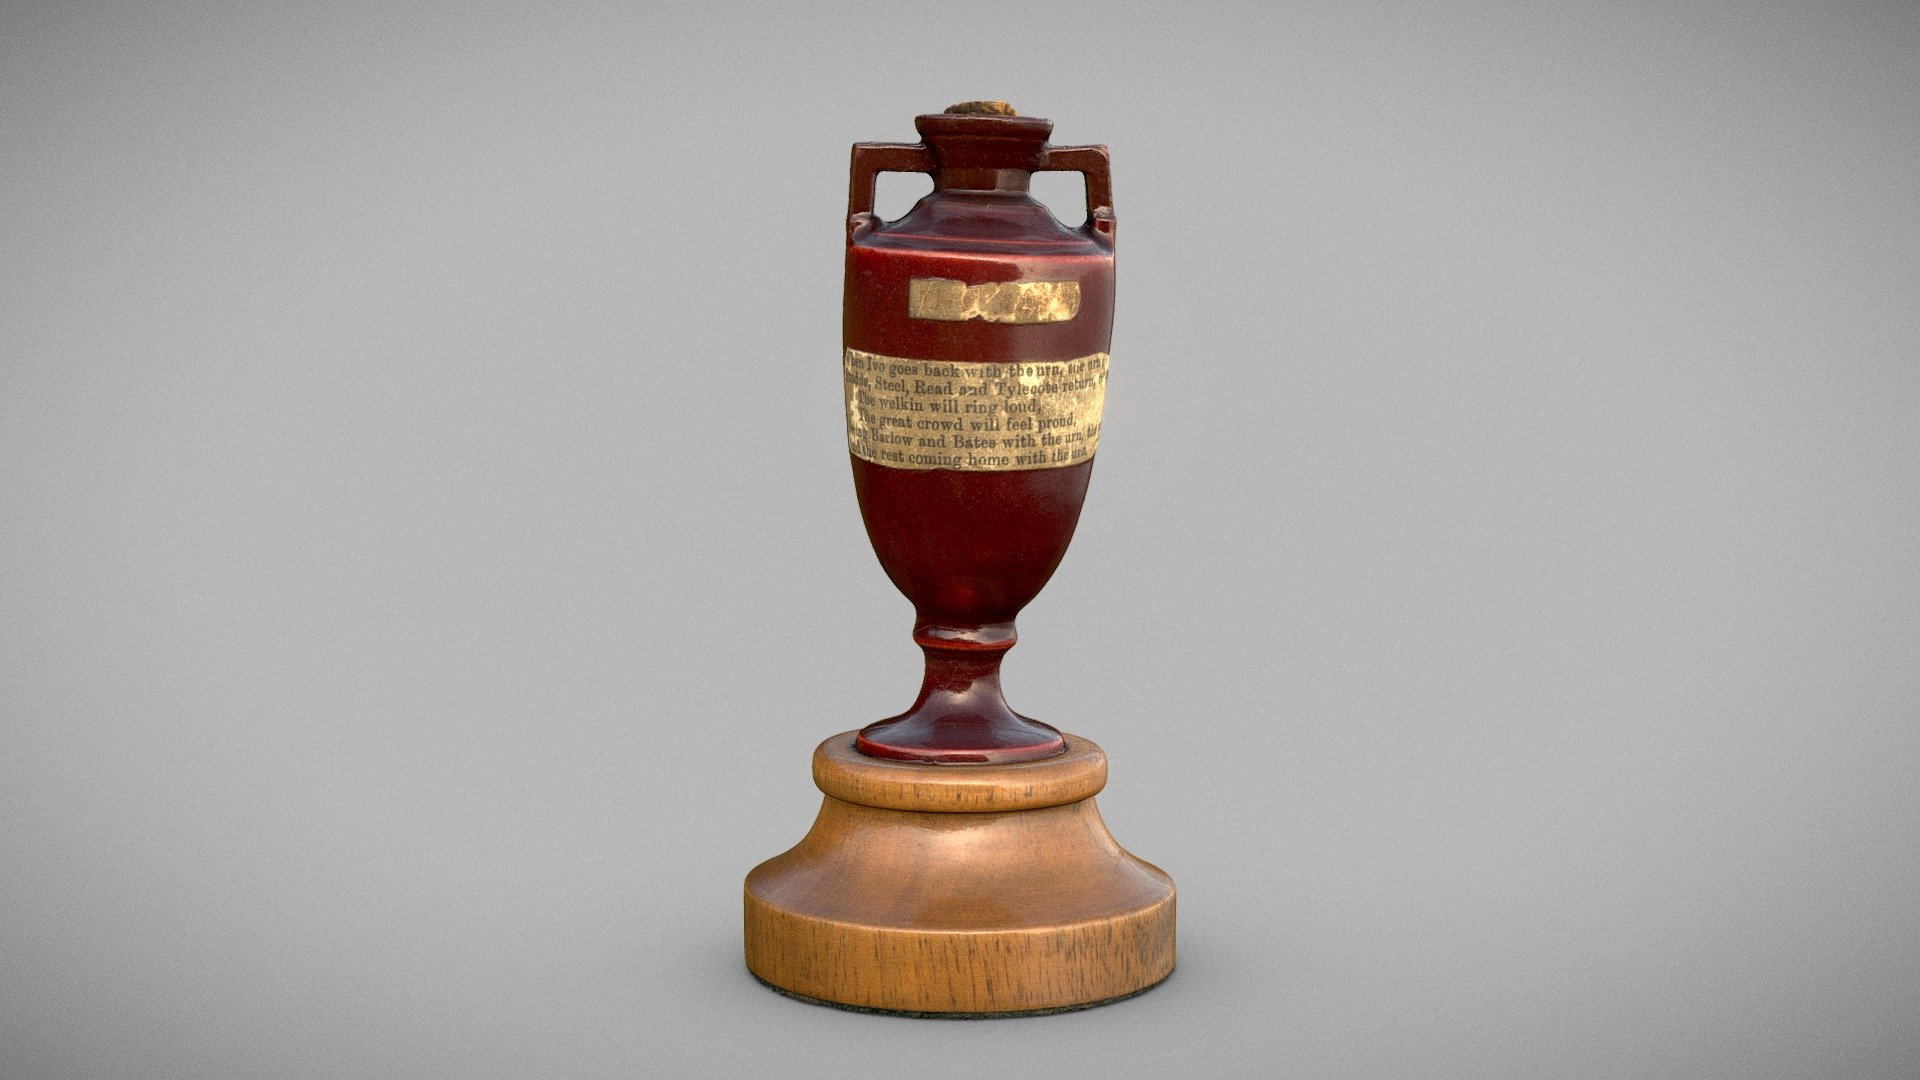 For 137 years, England and Australia’s cricket teams have competed for ownership of ‘The Ashes’. The series of matches is so named following England’s unexpected defeat to Australia in the summer of 1882. A mock obituary in the Sporting Times stated that the body of English cricket would be cremated, and its ashes taken to Australia. During the next test series, played in Australia, a small ‘urn’ was presented to the English captain, Ivo Bligh.

As part of a knowledge-share between the museums, we agreed to use our digitisation studio services to create a 3D model of the MCC Museum's most iconic object - the Ashes Urn.

Known as ‘the Home of Cricket’, Lord’s Cricket Ground contains the world’s oldest sporting museum and library, where much of cricket’s history is preserved and documented. The Ashes Urn forms a centrepiece of the museum and is arguably its most iconic object. https://www.lords.org/lords/our-history/the-ashes

Model optimised by Thomas Flynn of sketchfab.com - The Ashes Urn - 3D model by The Postal Museum (@postal) 3d model